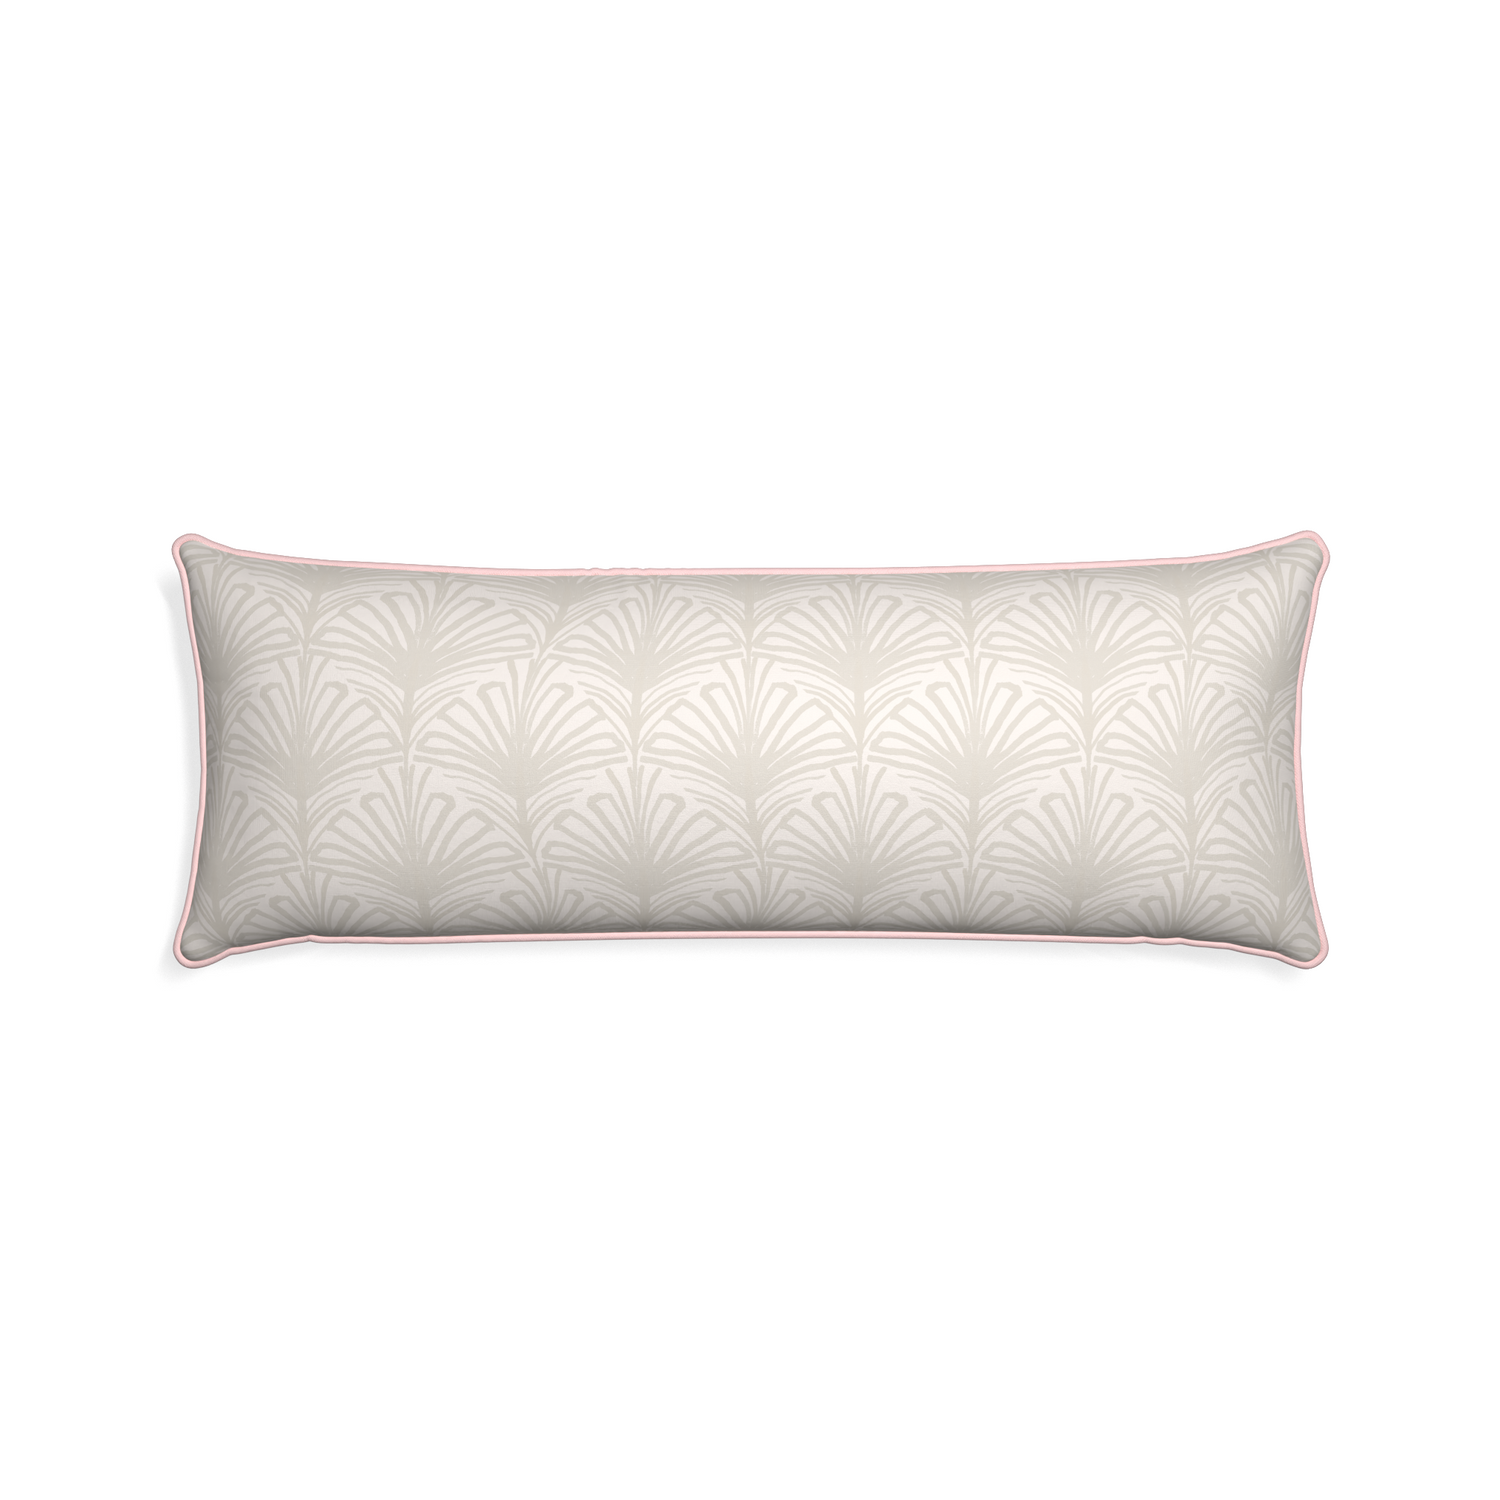 Xl-lumbar suzy sand custom pillow with petal piping on white background